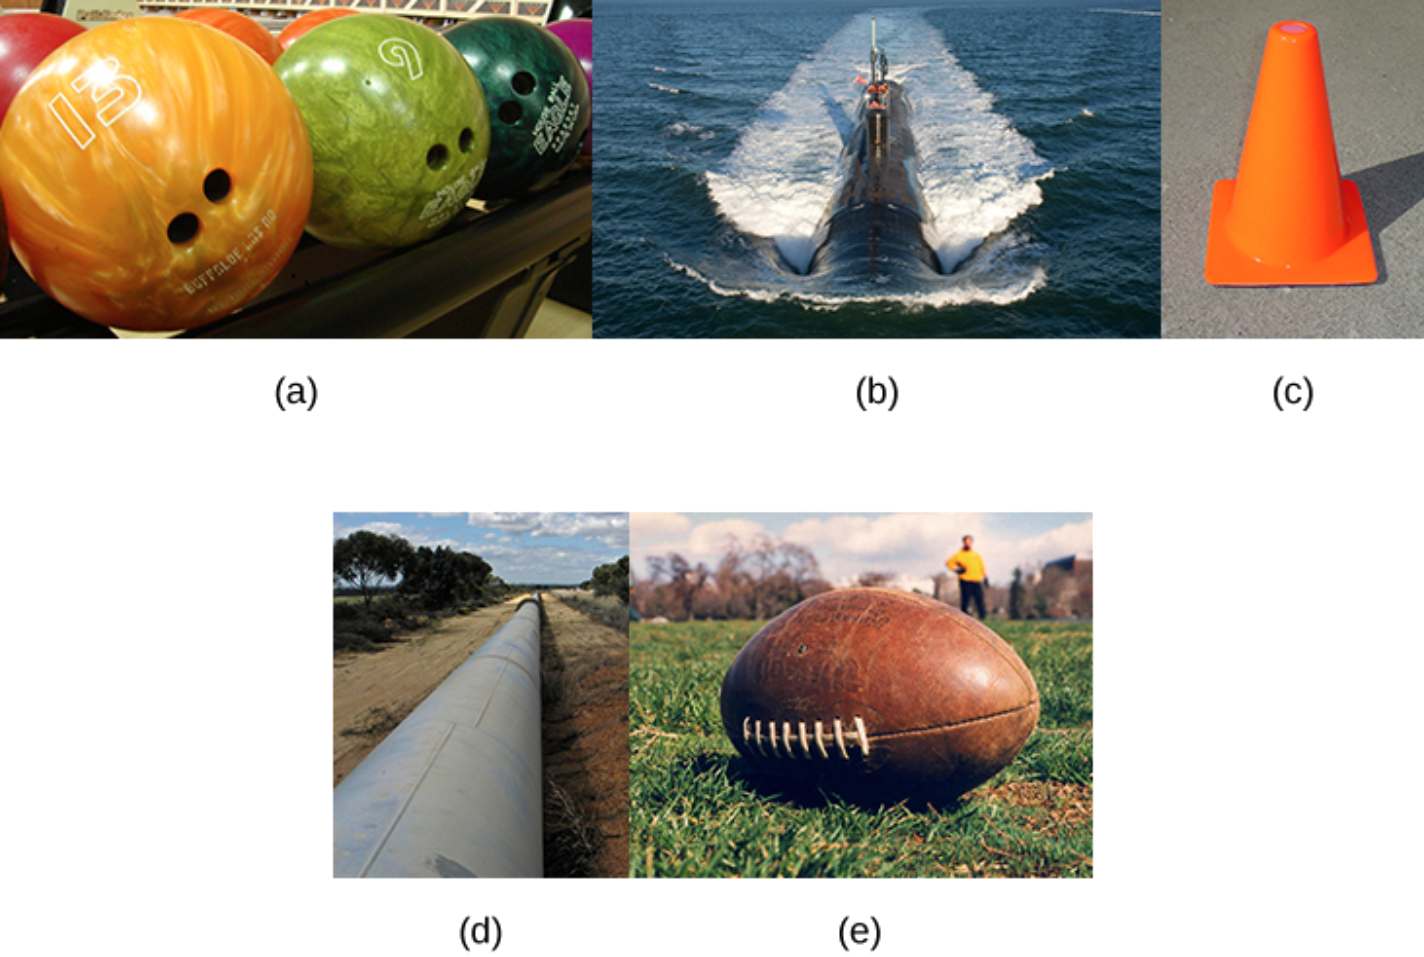 This figure has 5 images. The first image shows bowling balls. The second image is a submarine traveling on an ocean surface. The third image is a traffic cone. The fourth image is a pipline across some barren land. The fifth image is a football.